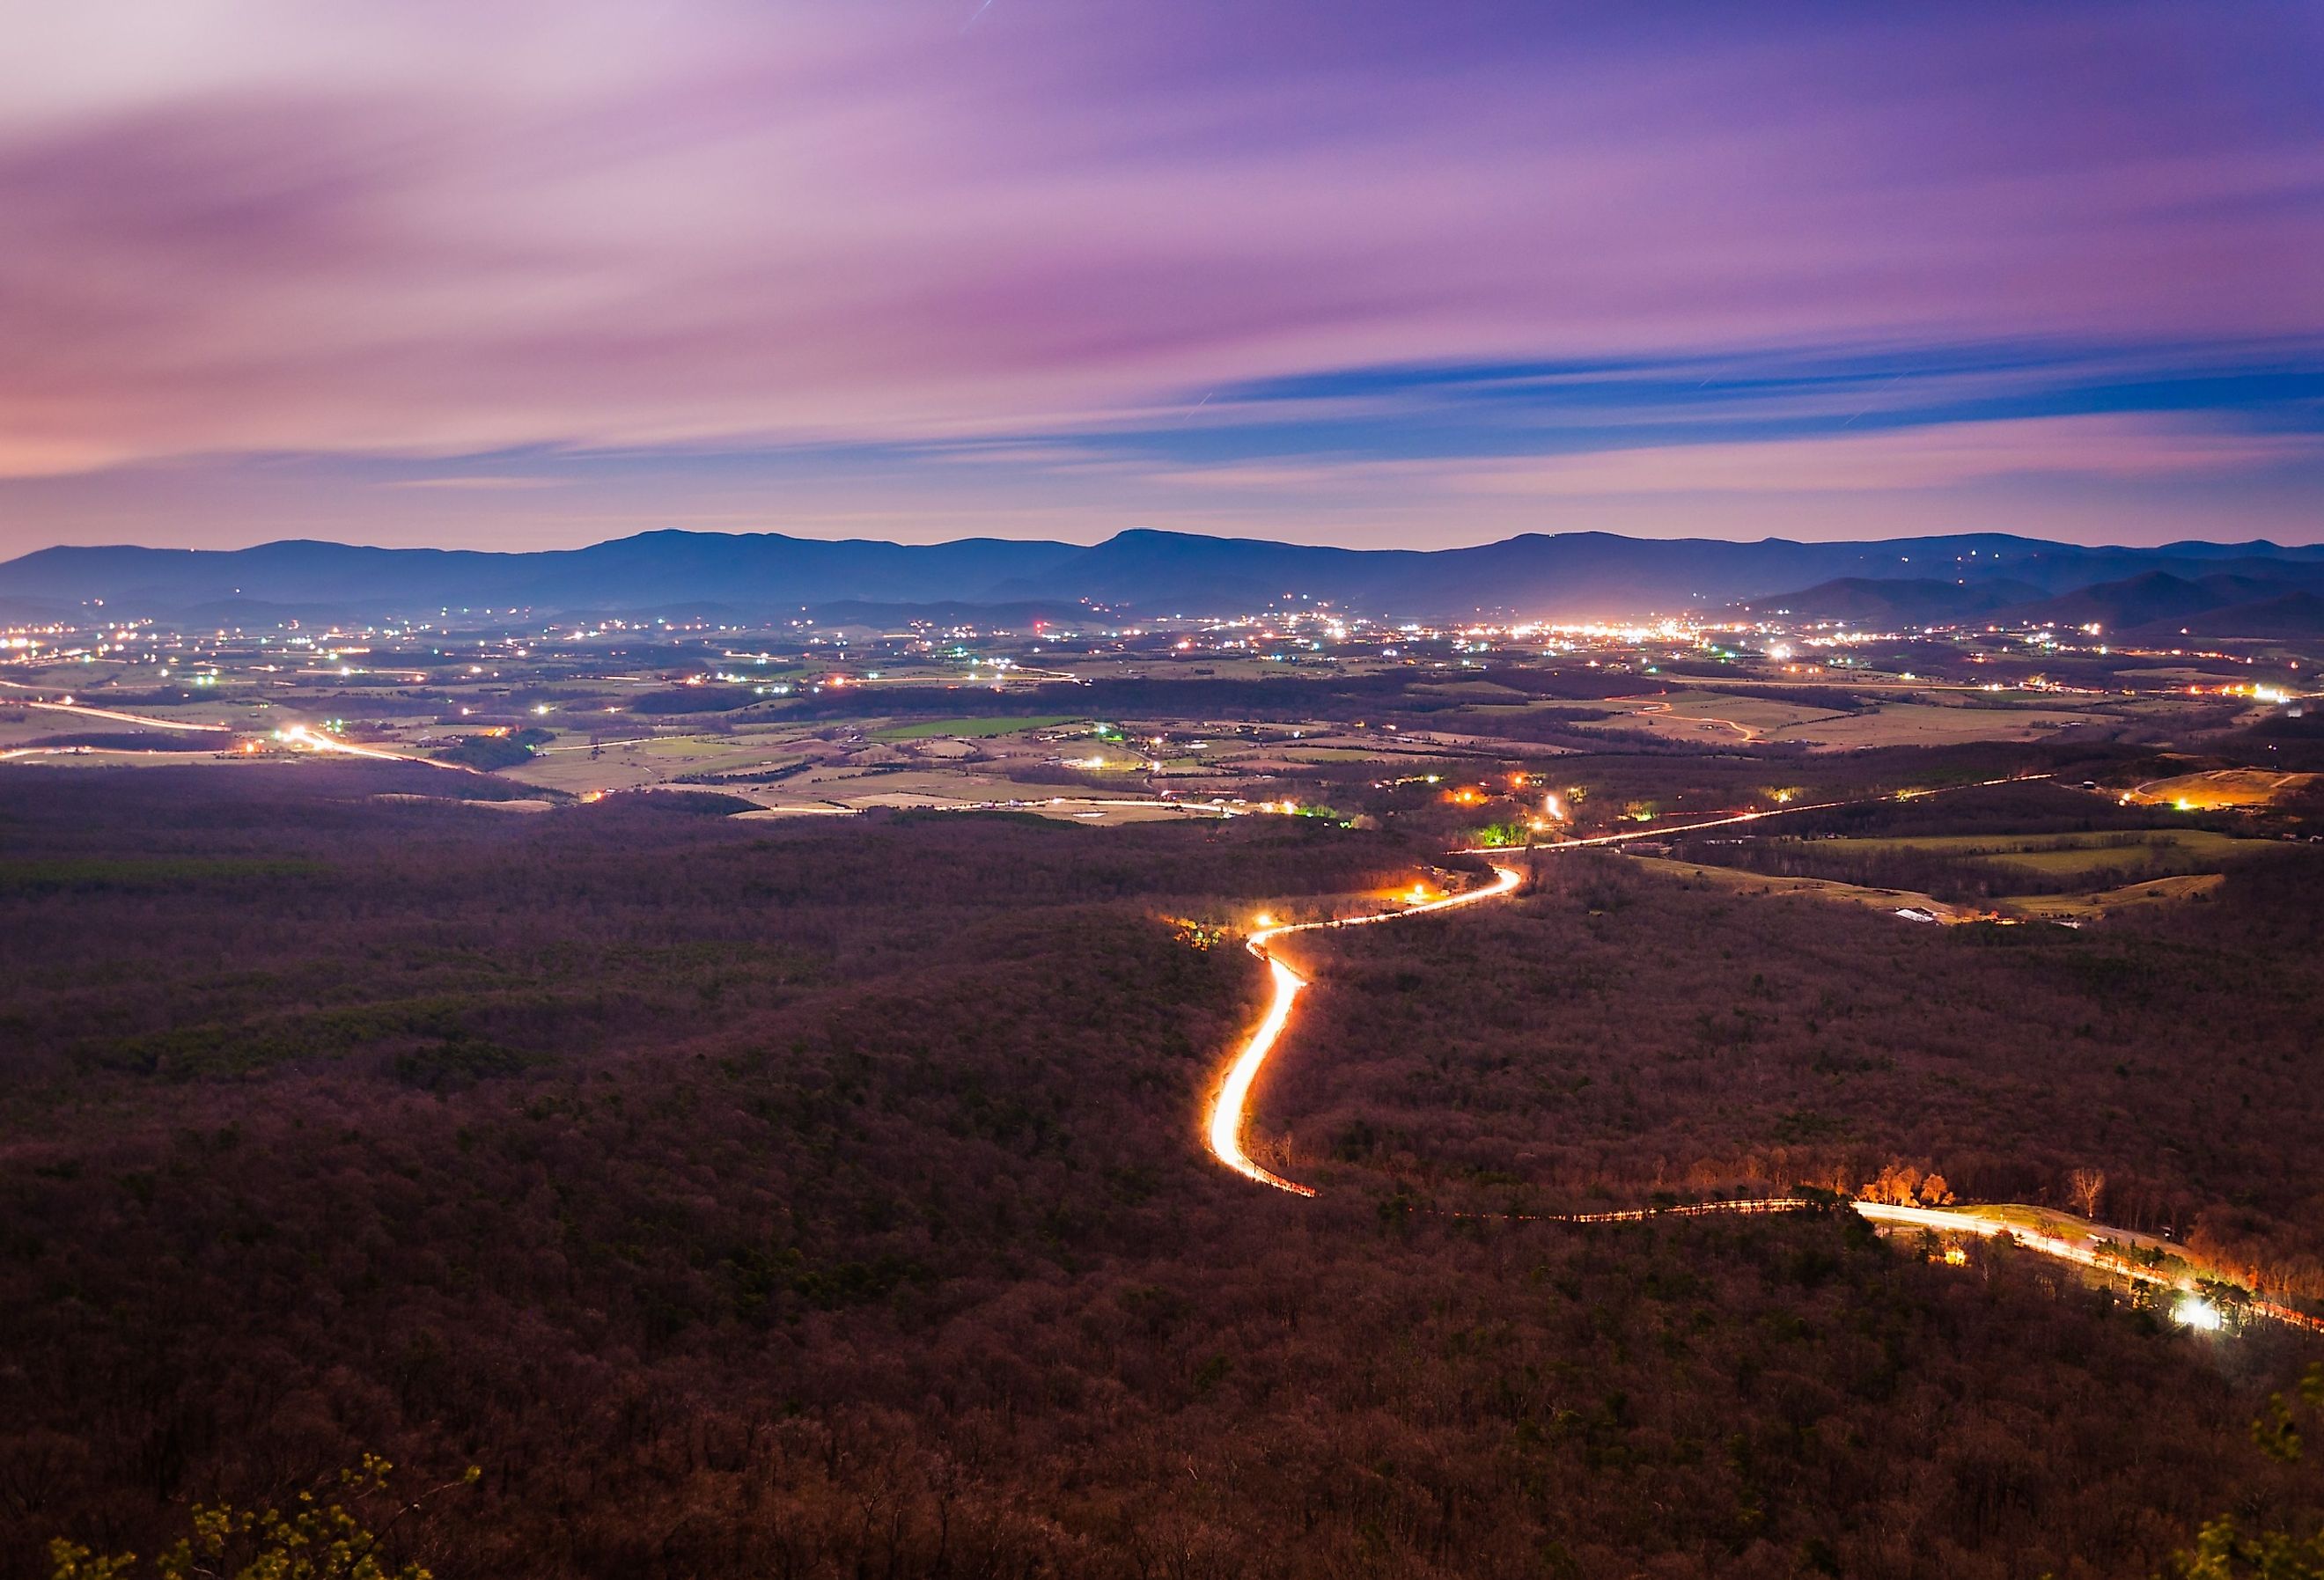 View of the Shenandoah Valley and Luray at night from Massanutten Mountain, in George Washington National Forest, Virginia